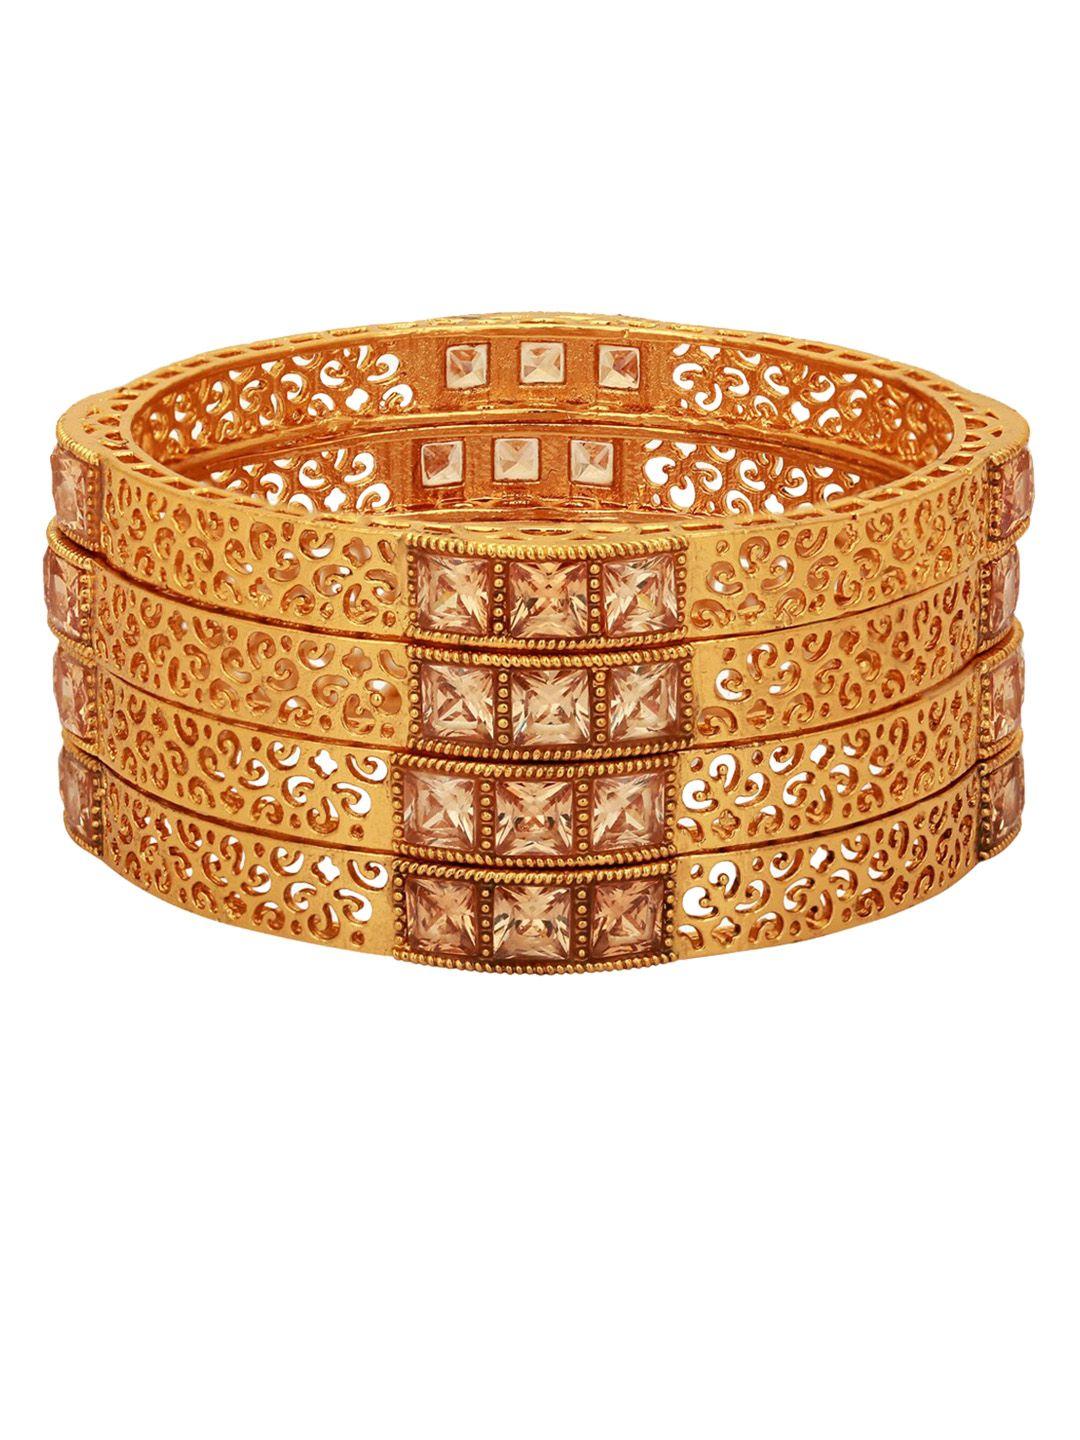 adwitiya collection set of 4 24ct gold-plated & beige stone-studded handcrafted bangles